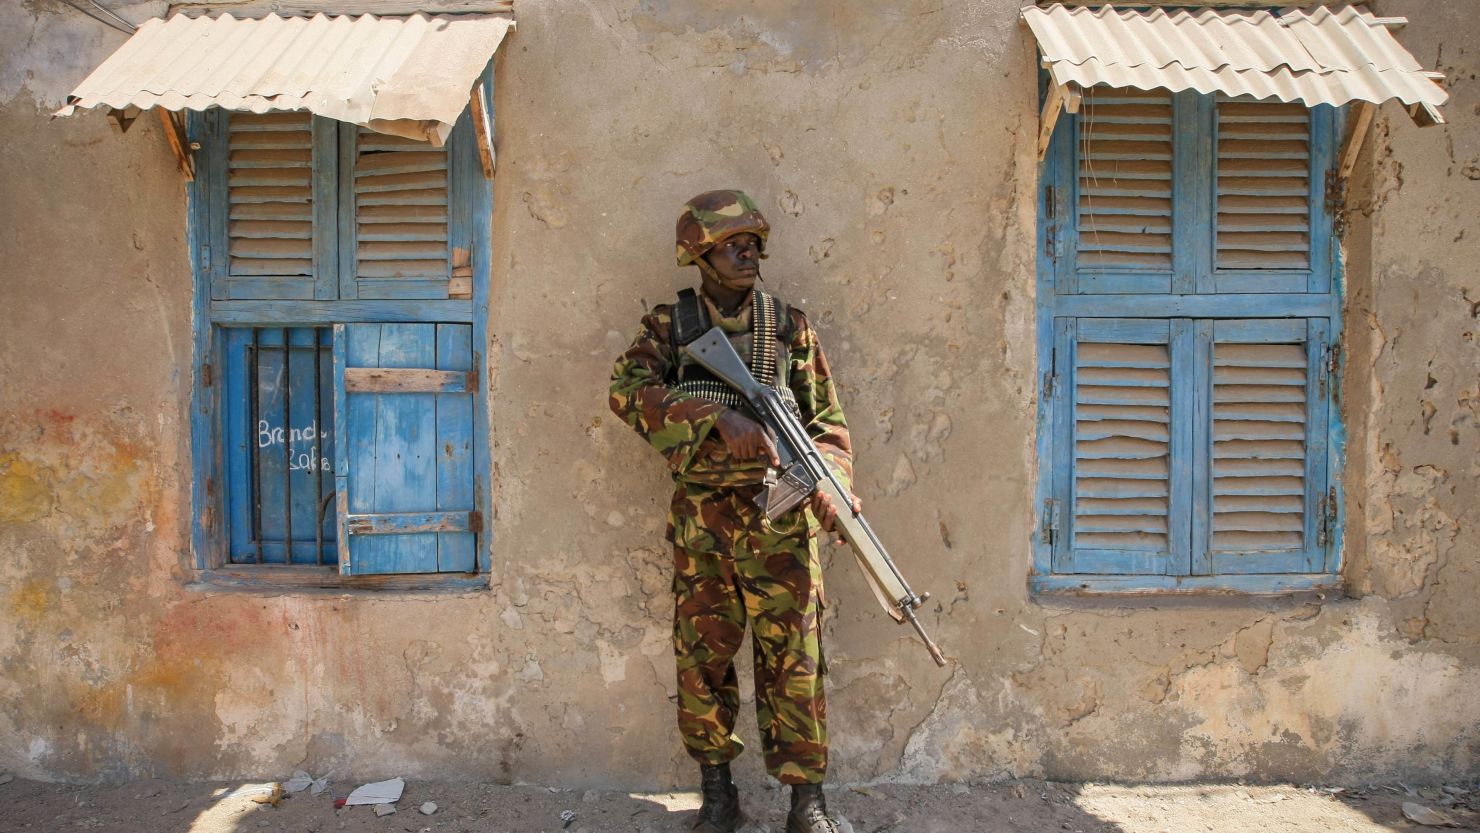 Kenyan troops are deployed in Somalia, as part of an African Union mission fighting Al-Shabaab.